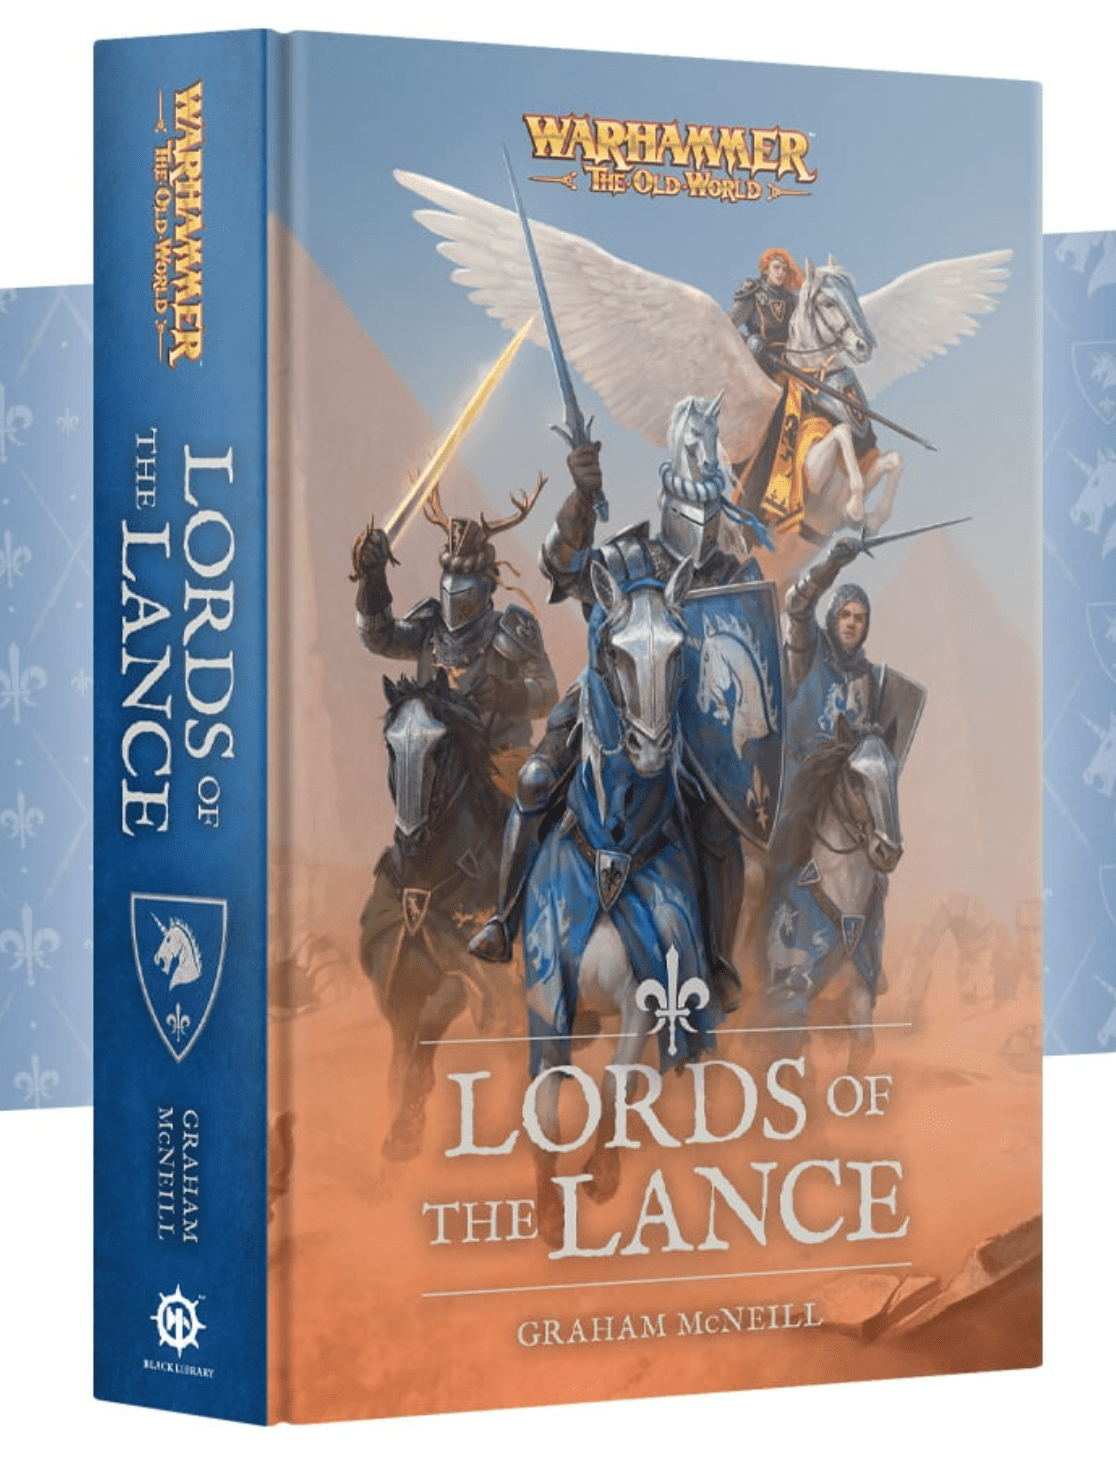 Warhammer Lord of the Lance Hardcover